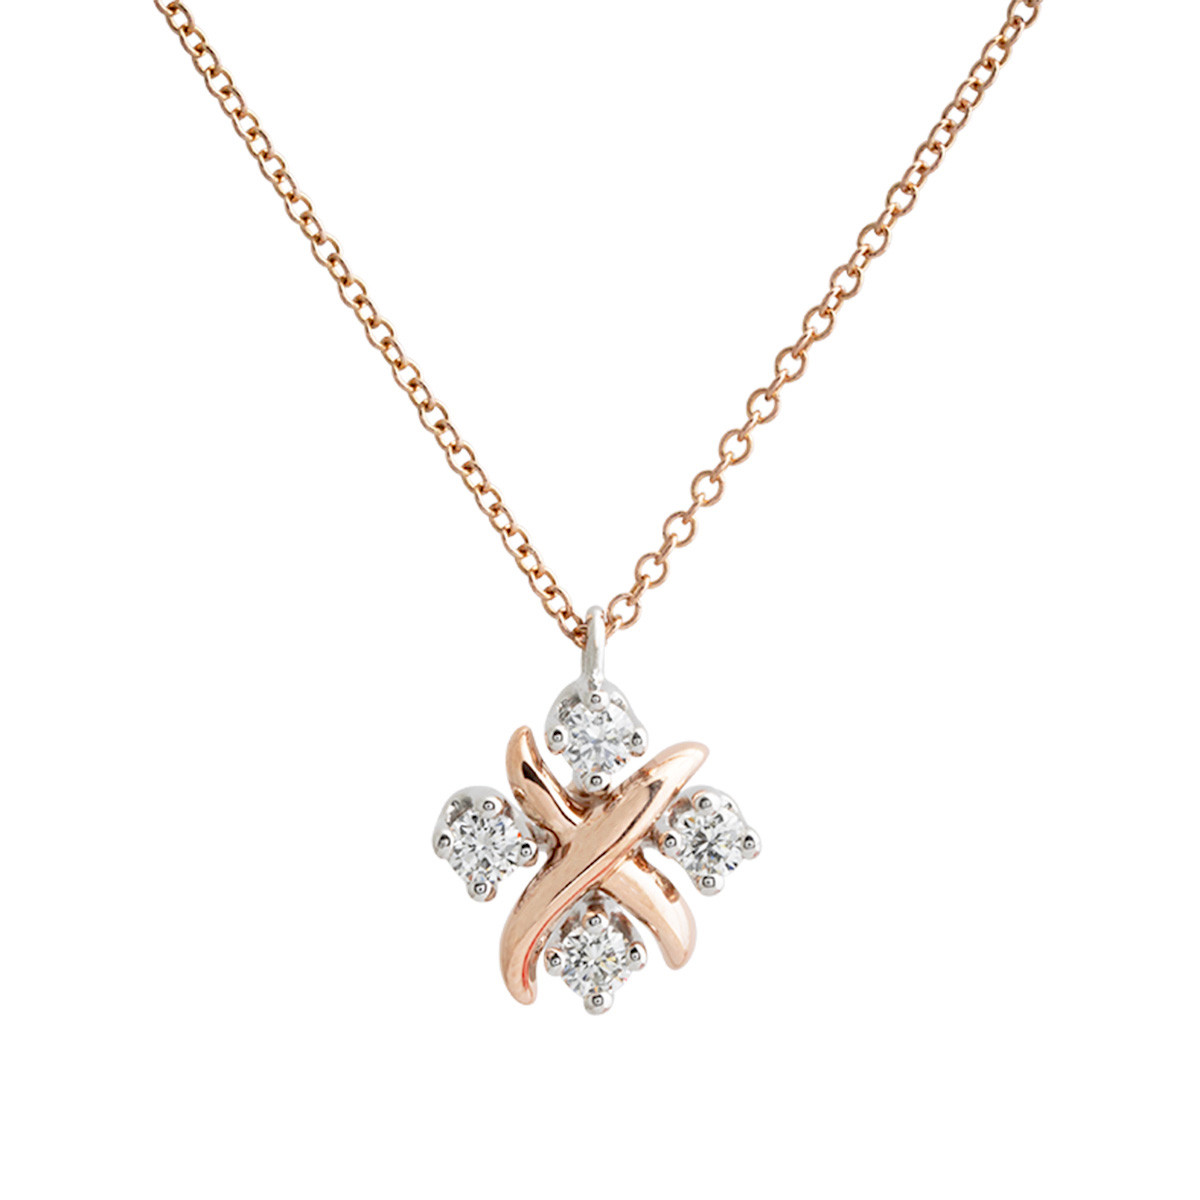 Tiffany & Co. Sterling Silver Gramophone Charm Necklace 18 Chain —  DeWitt's Diamond & Gold Exchange